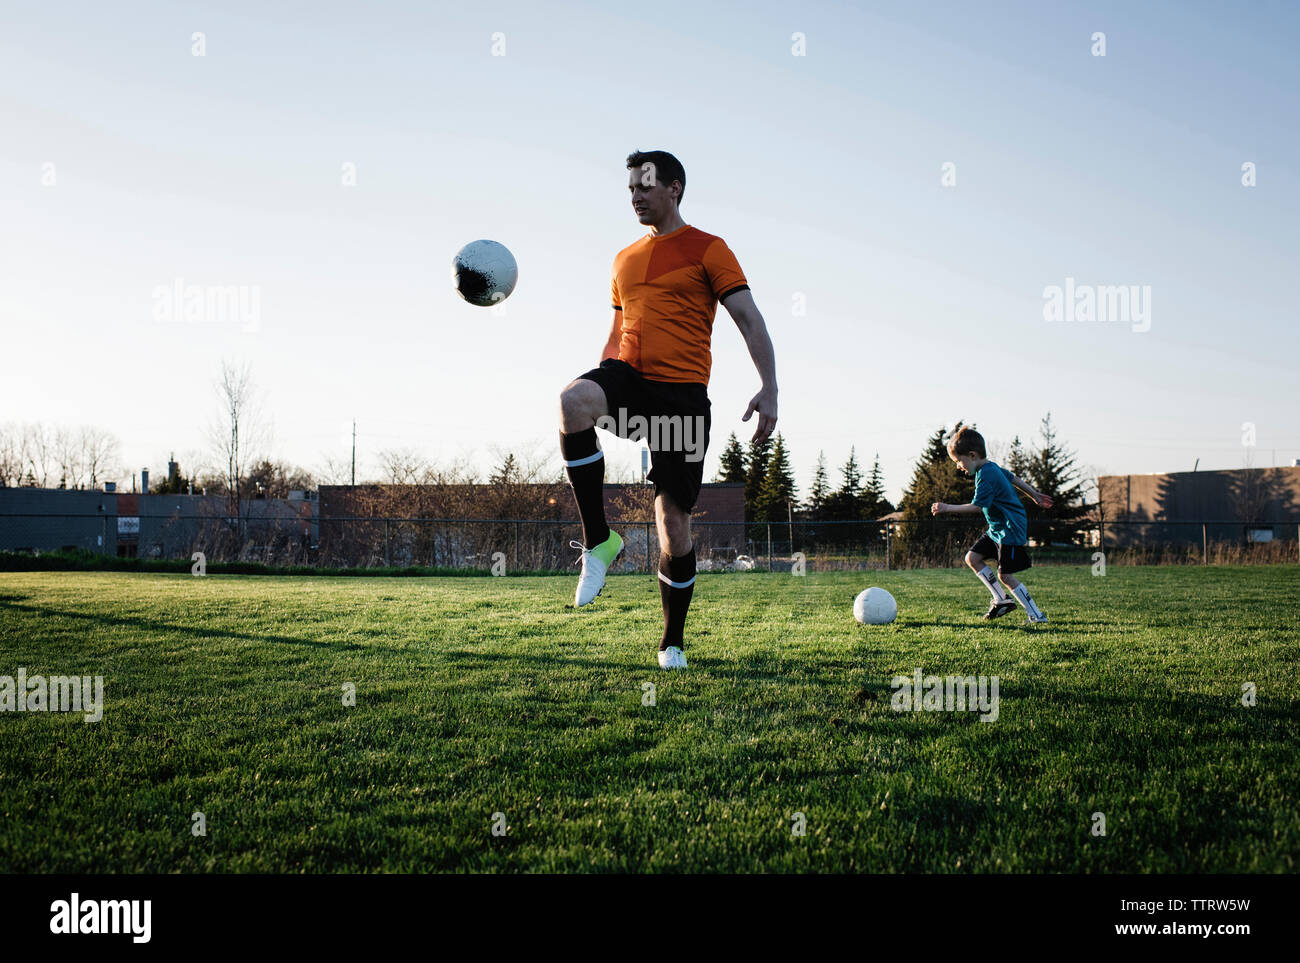 Father and son practicing soccer on grassy field against clear sky at park Stock Photo